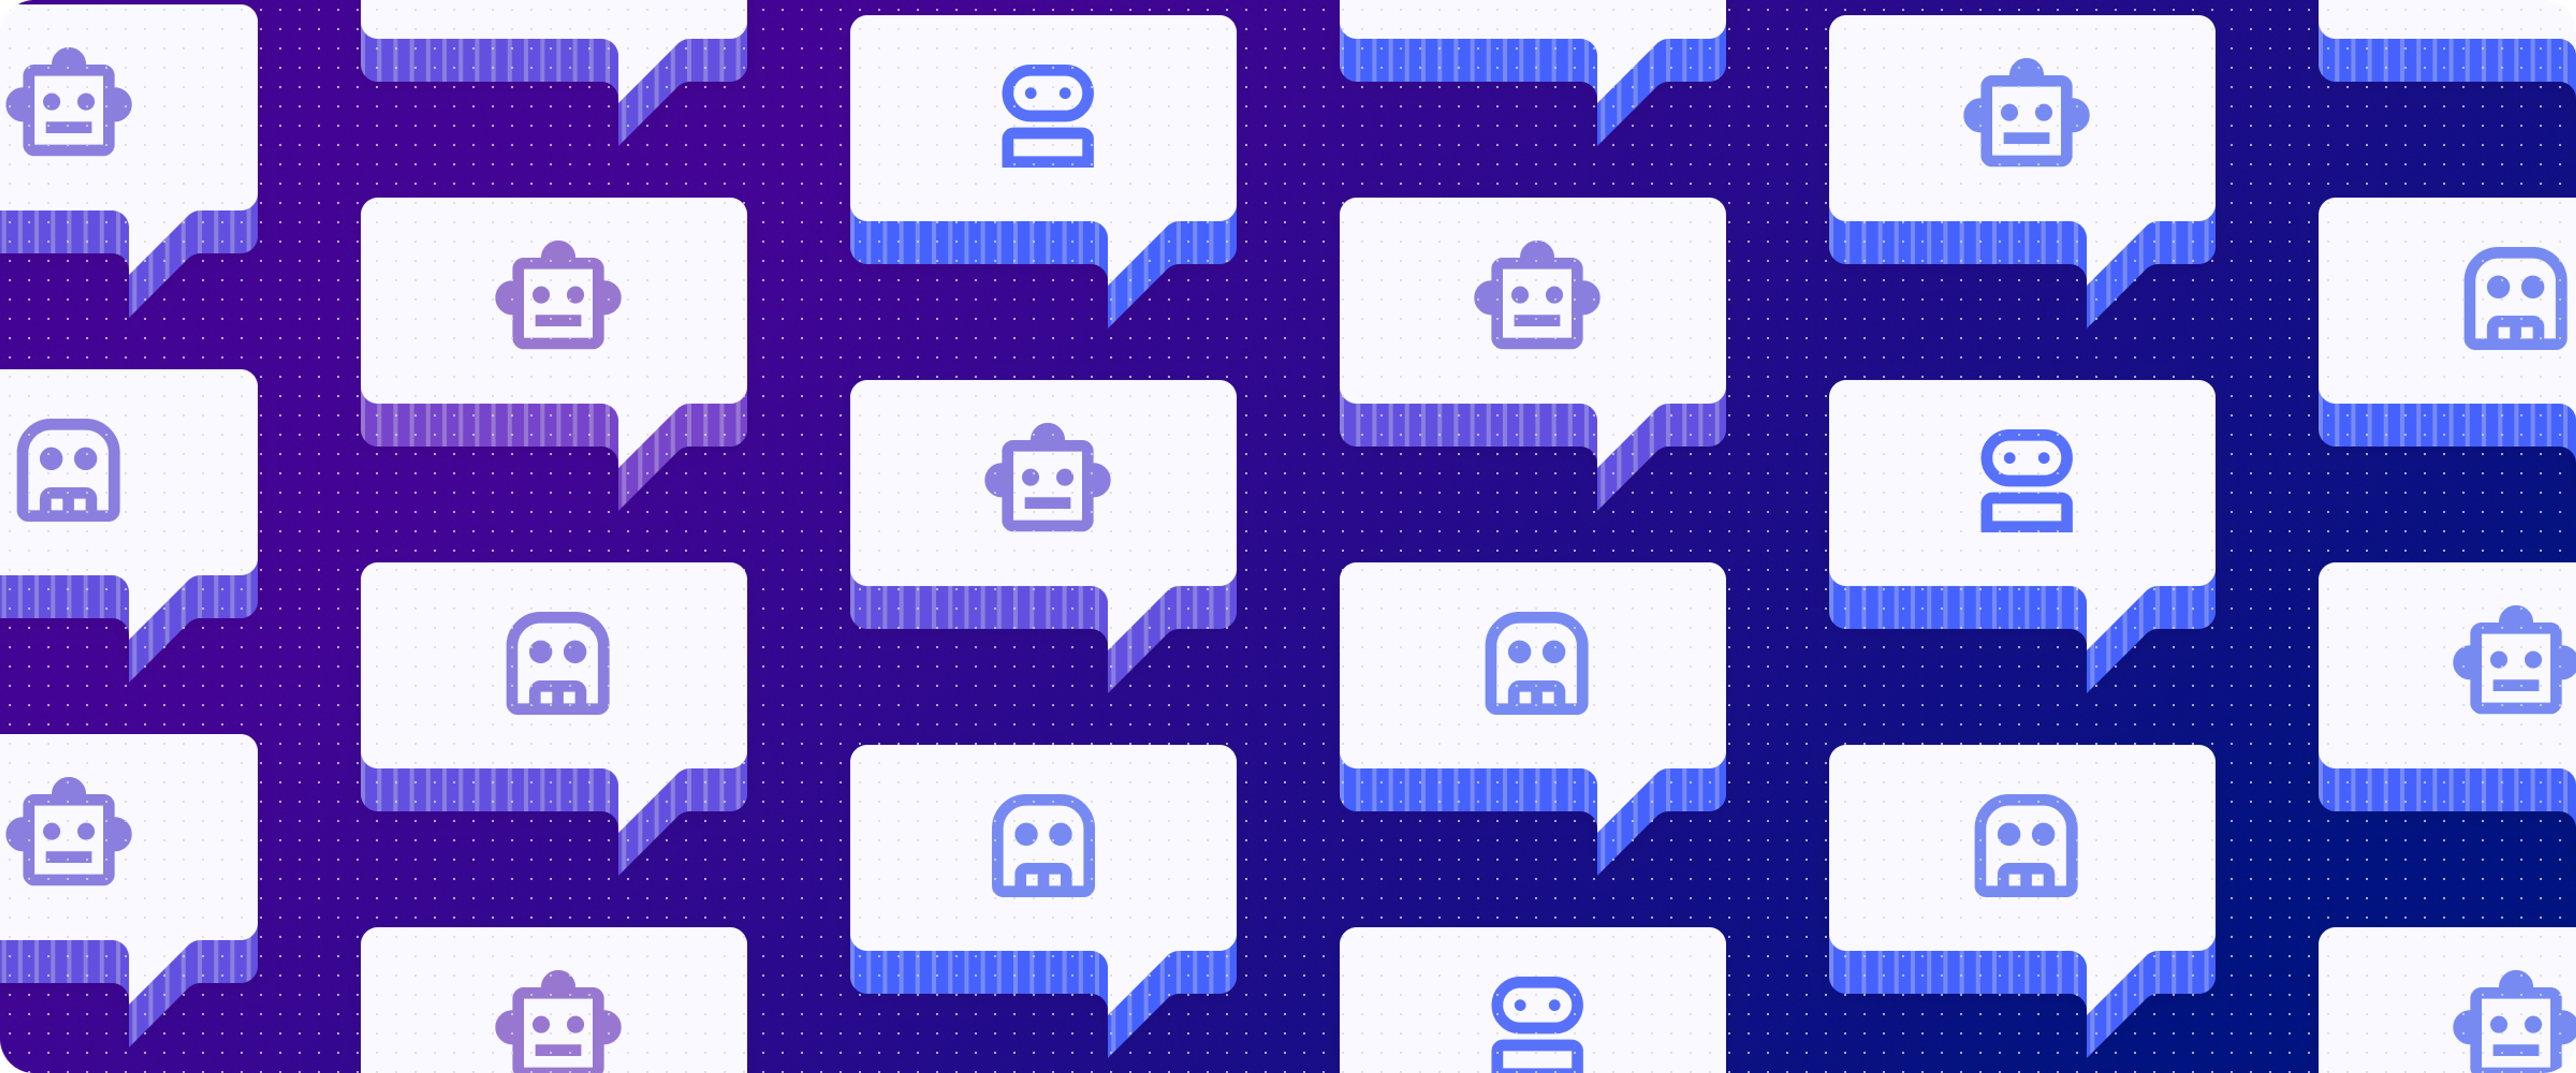 Decorative banner of quote bubbles and bots